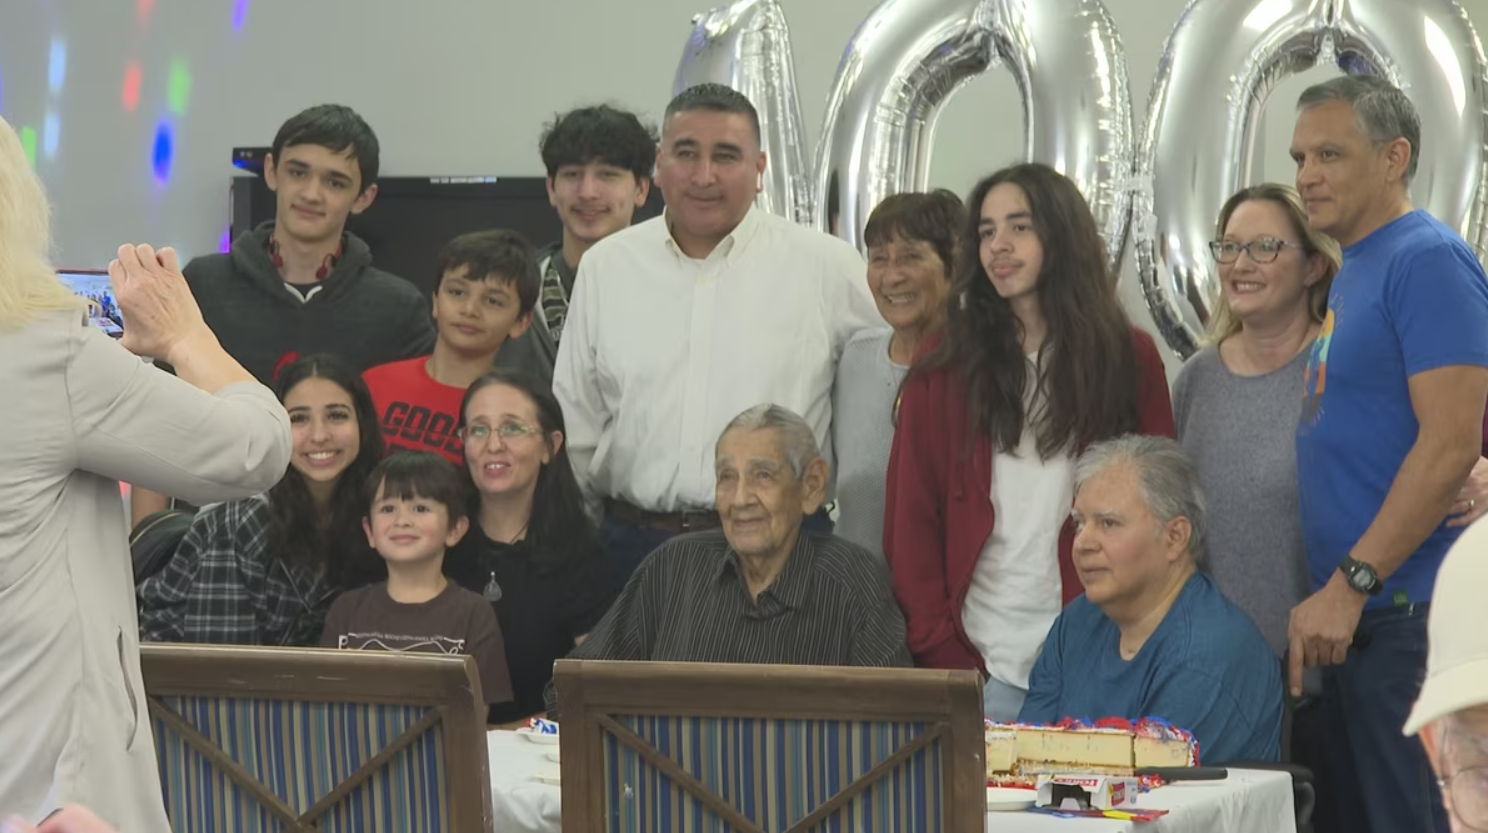 senior man celebrates his 100th birthday with family and friends at his senior living community